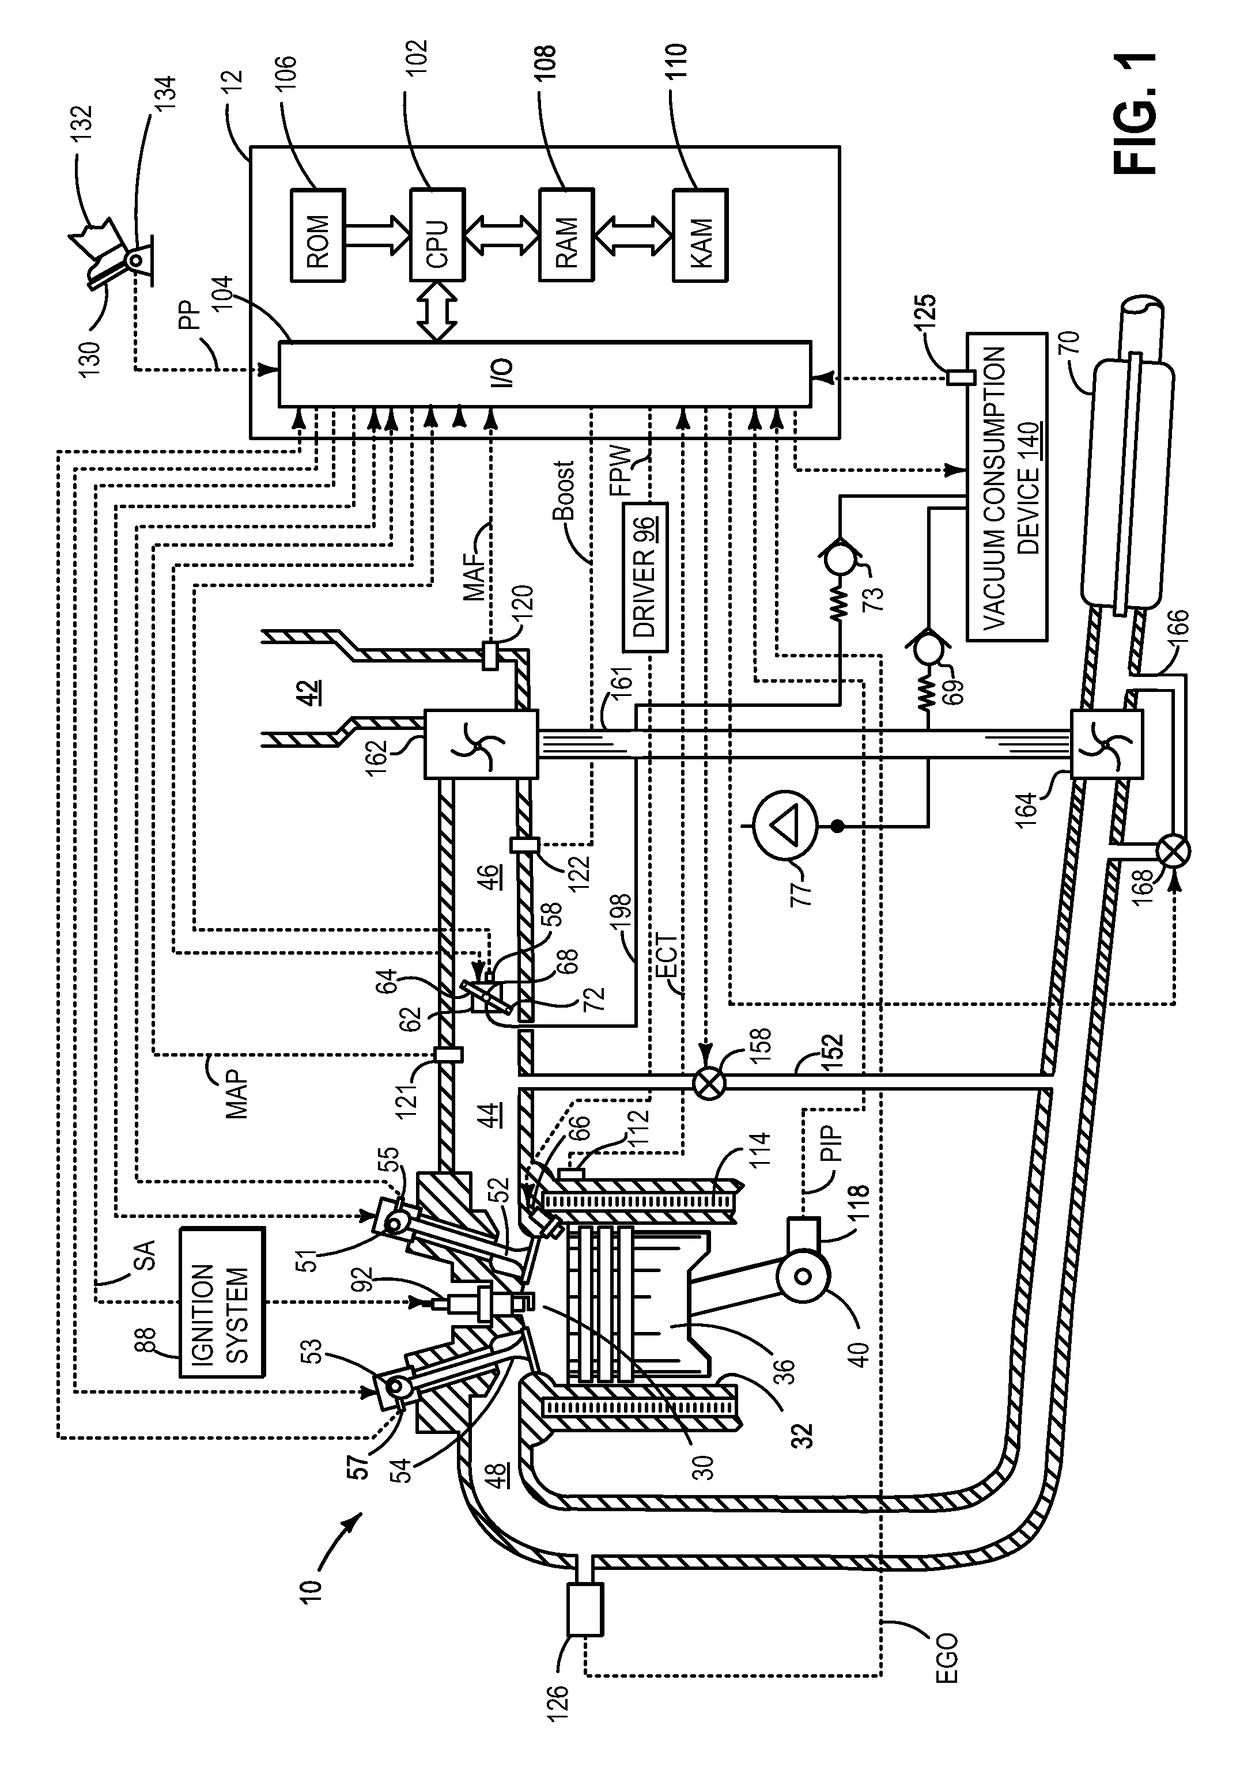 Method and system for vacuum generation using a throttle